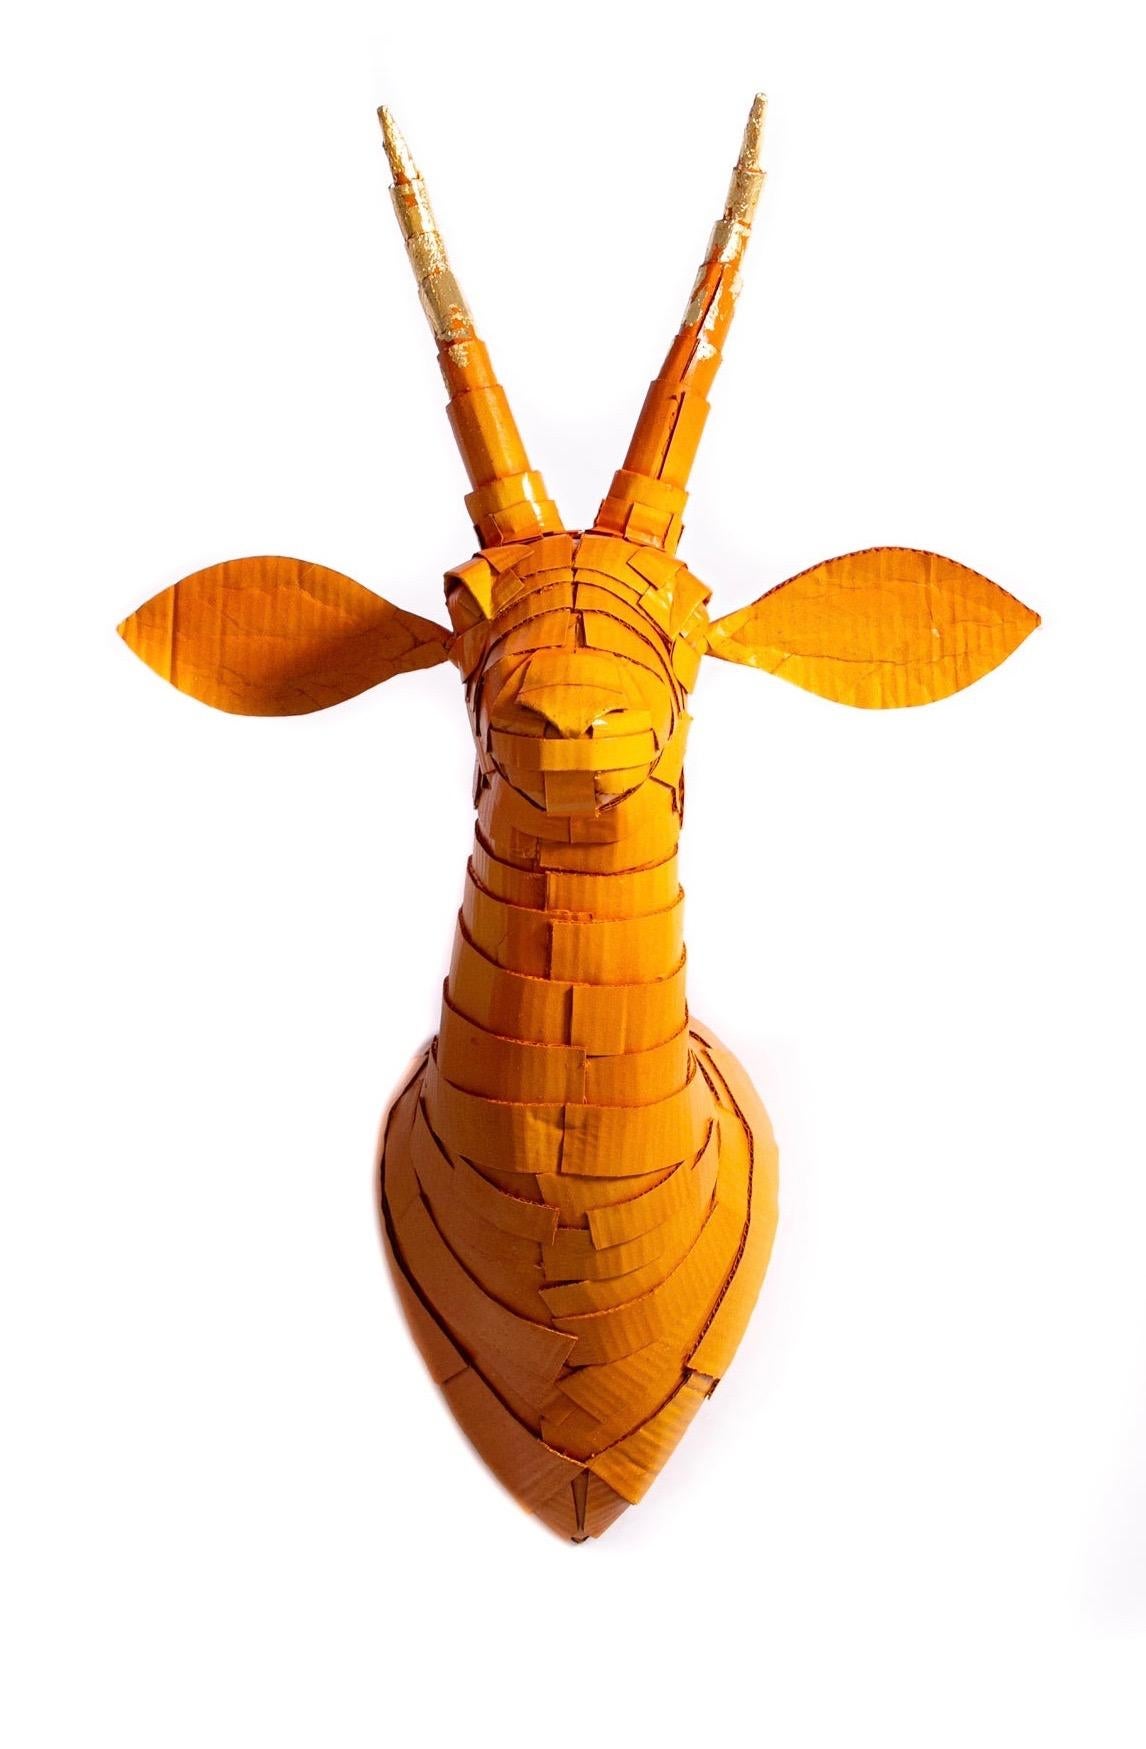 Gazelle #5 in Persimmon Orange with Gold Leaf Horn Detail - Art by Justin King